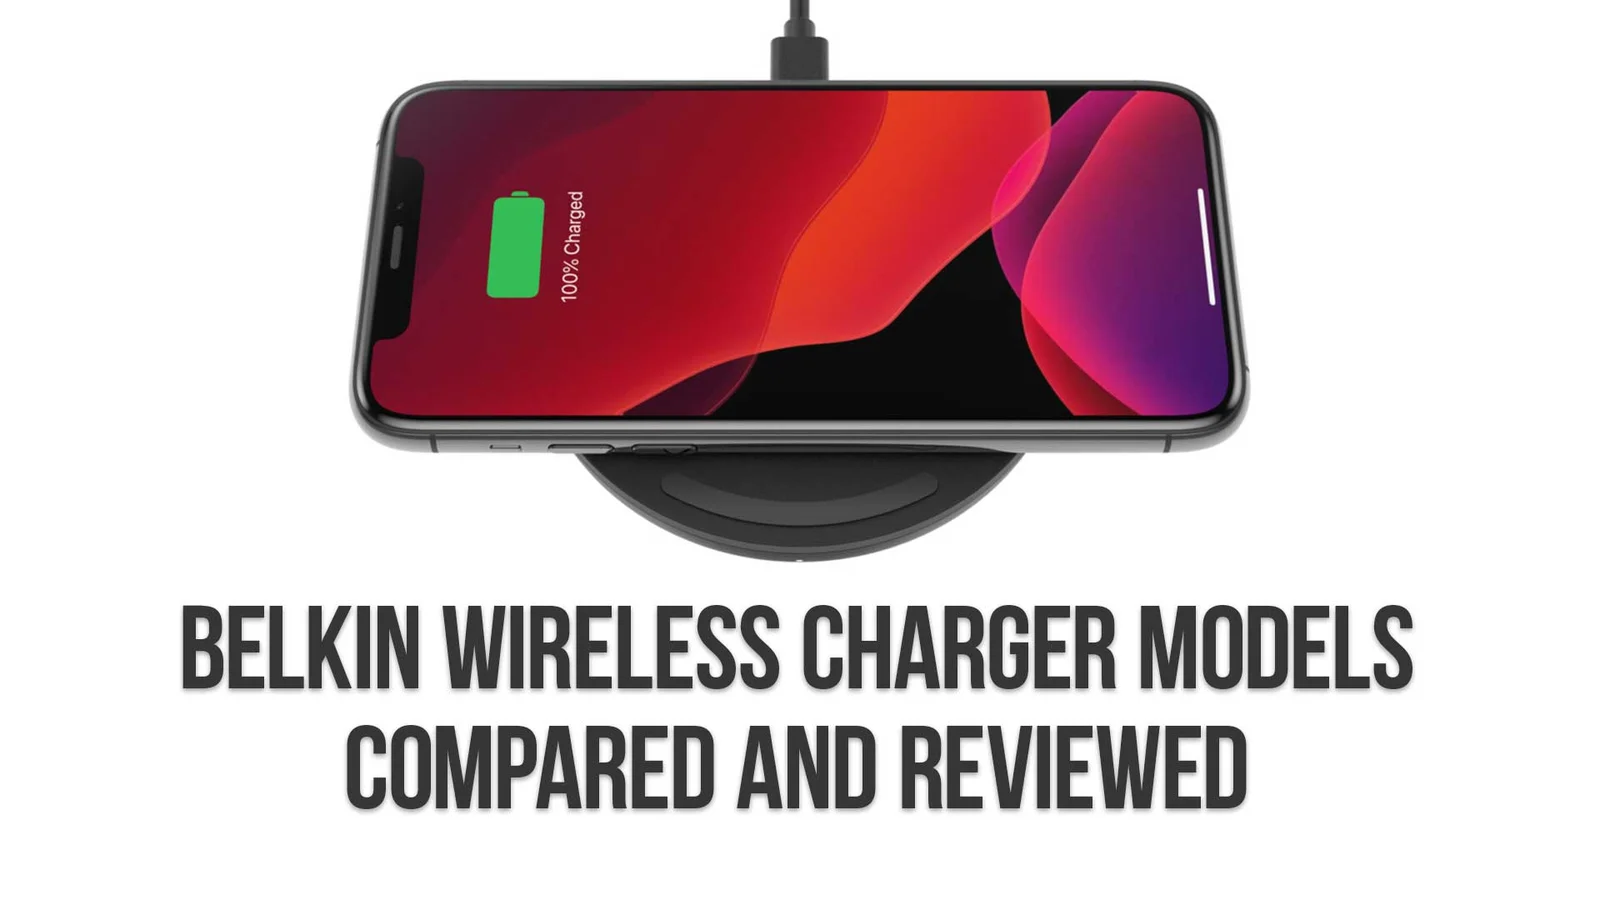 Belkin Wireless Charger Models Compared and Reviewed